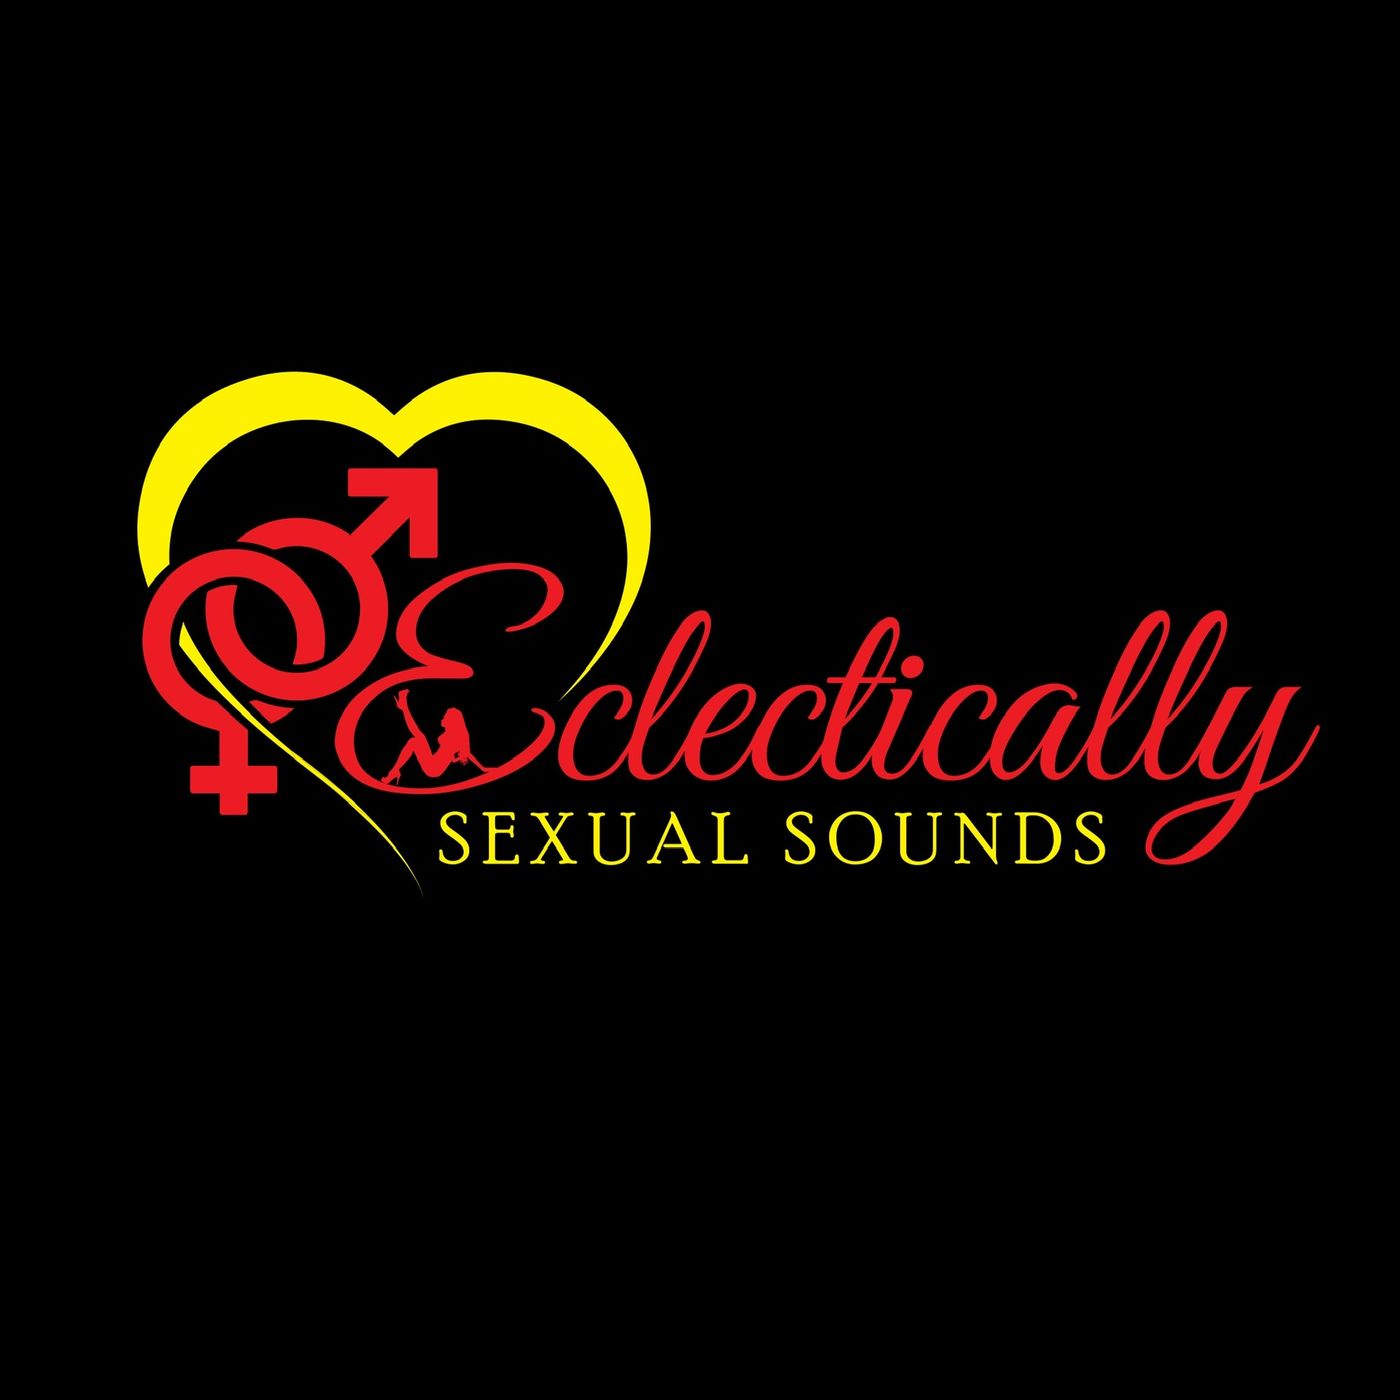 Eclectically Sexual Sounds